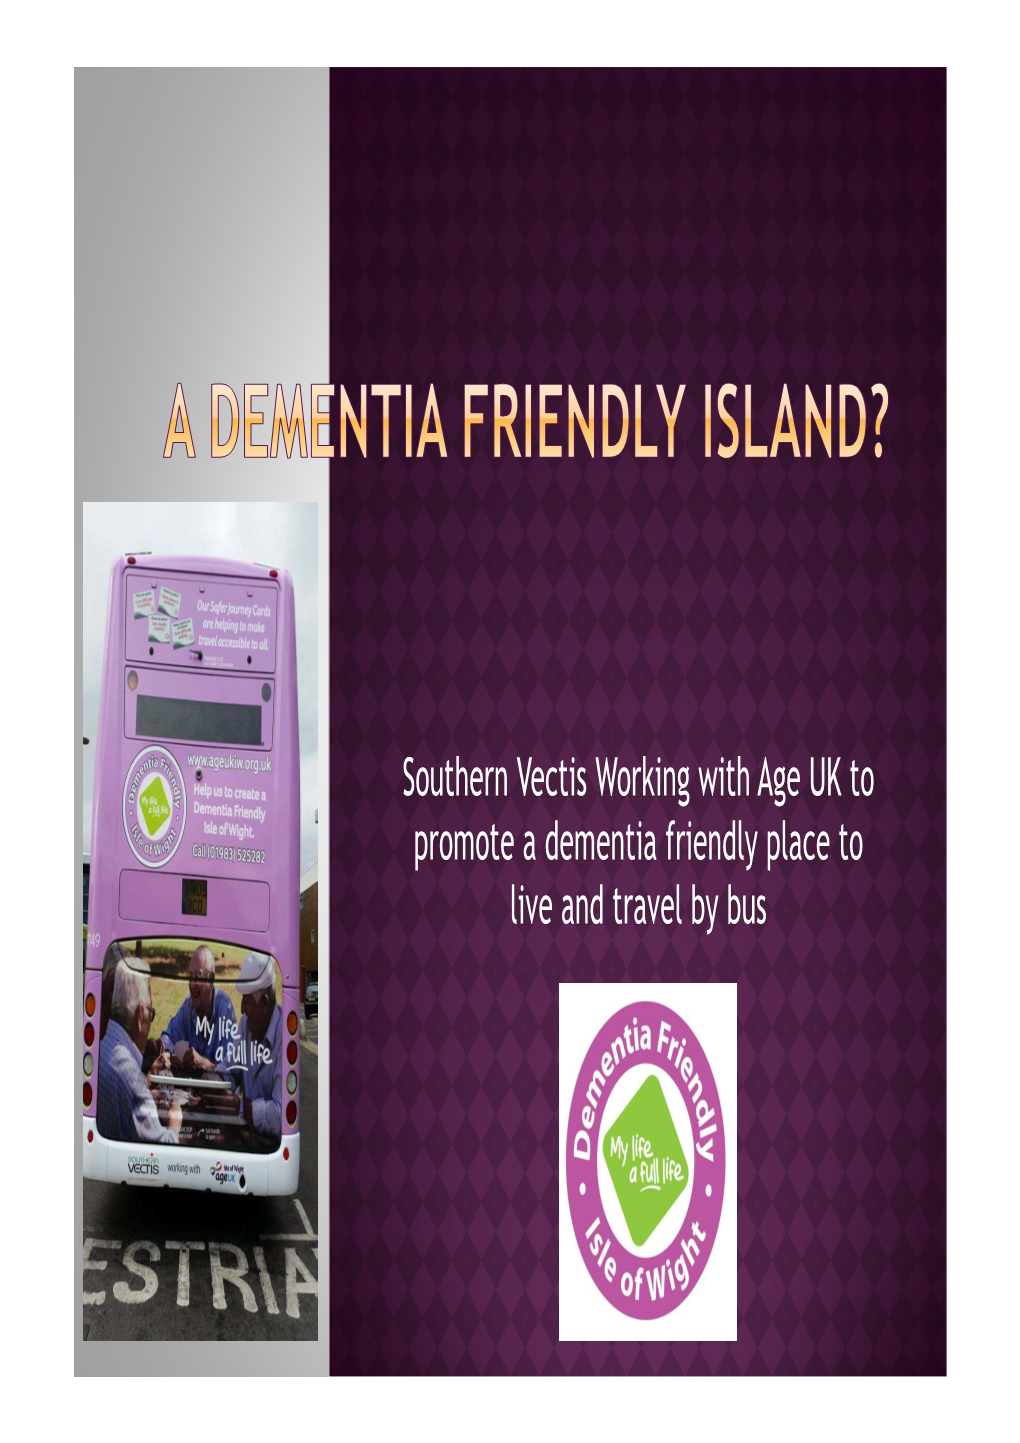 Southern Vectis Working with Age UK to Promote a Dementia Friendly